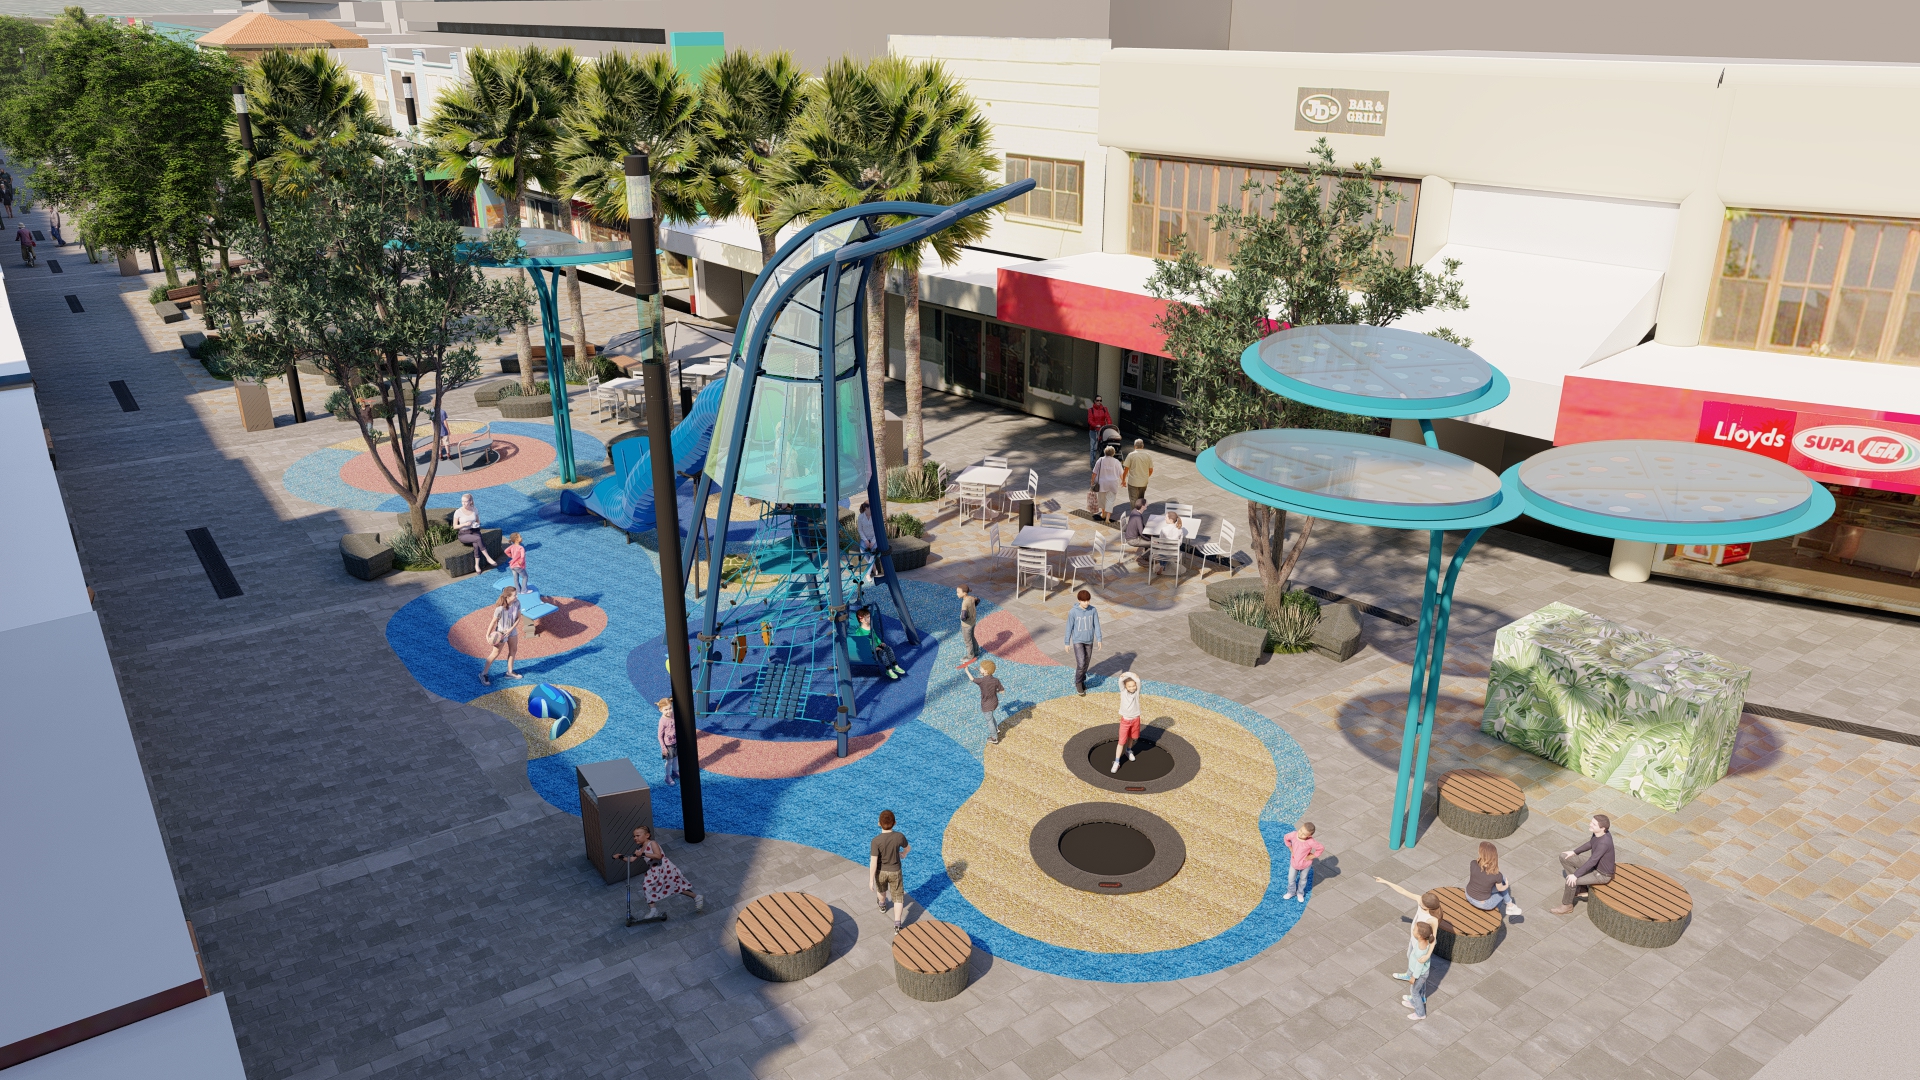 Ariel view of the whale tail play equipment